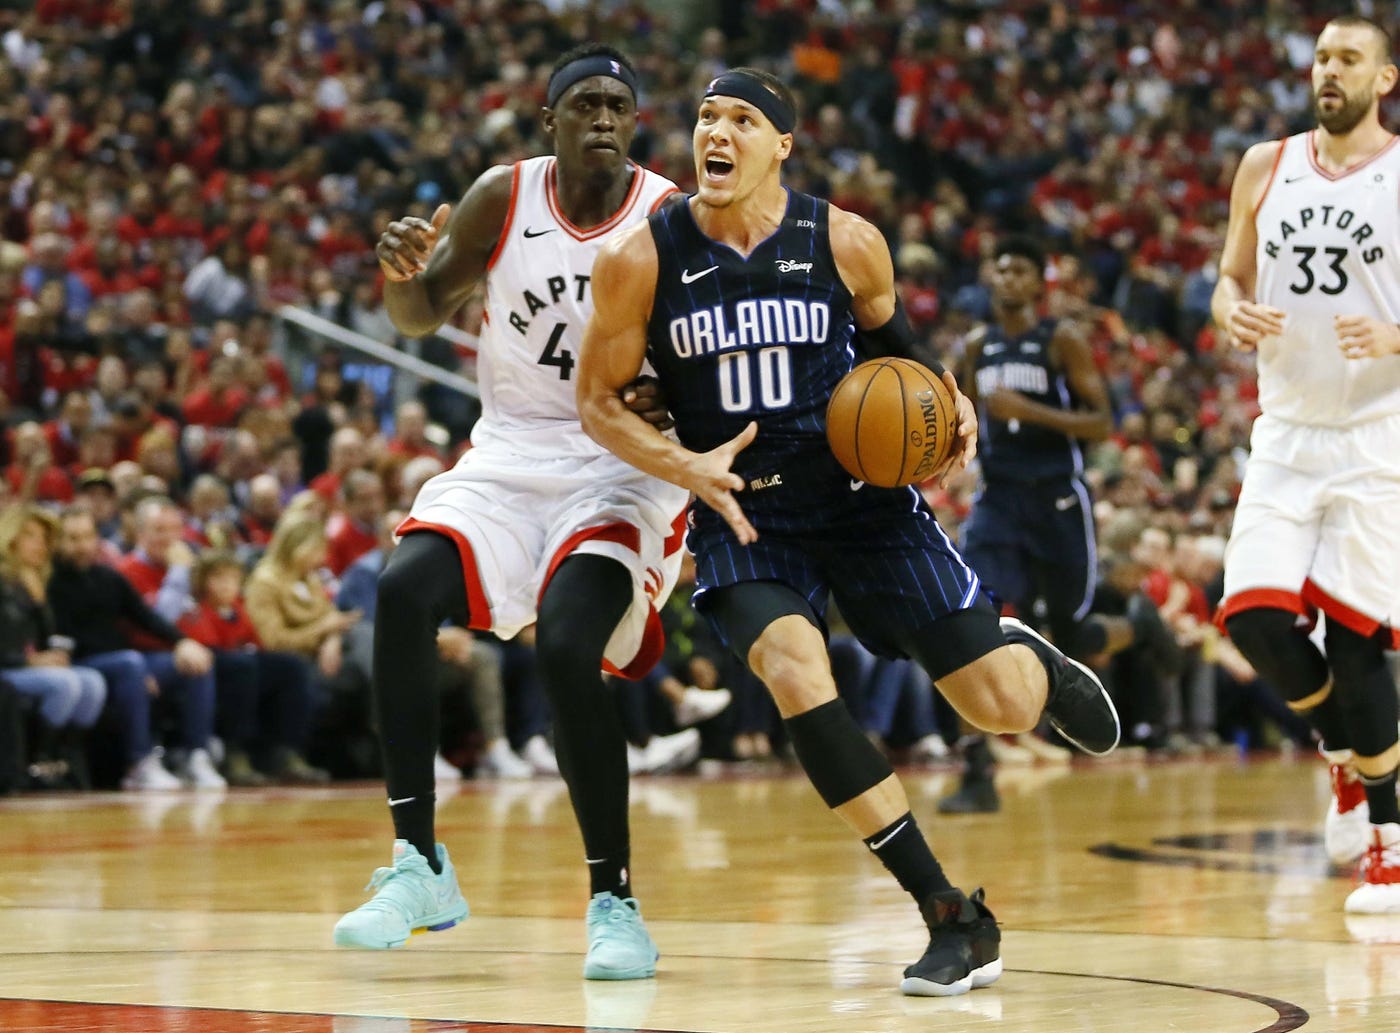 Apr 13, 2019; Toronto, Ontario, CAN; Orlando Magic forward Aaron Gordon (00) drives to the net against Toronto Raptors forward Pascal Siakam (43) during the first half of game one of the first round of the 2019 NBA Playoffs at Scotiabank Arena.